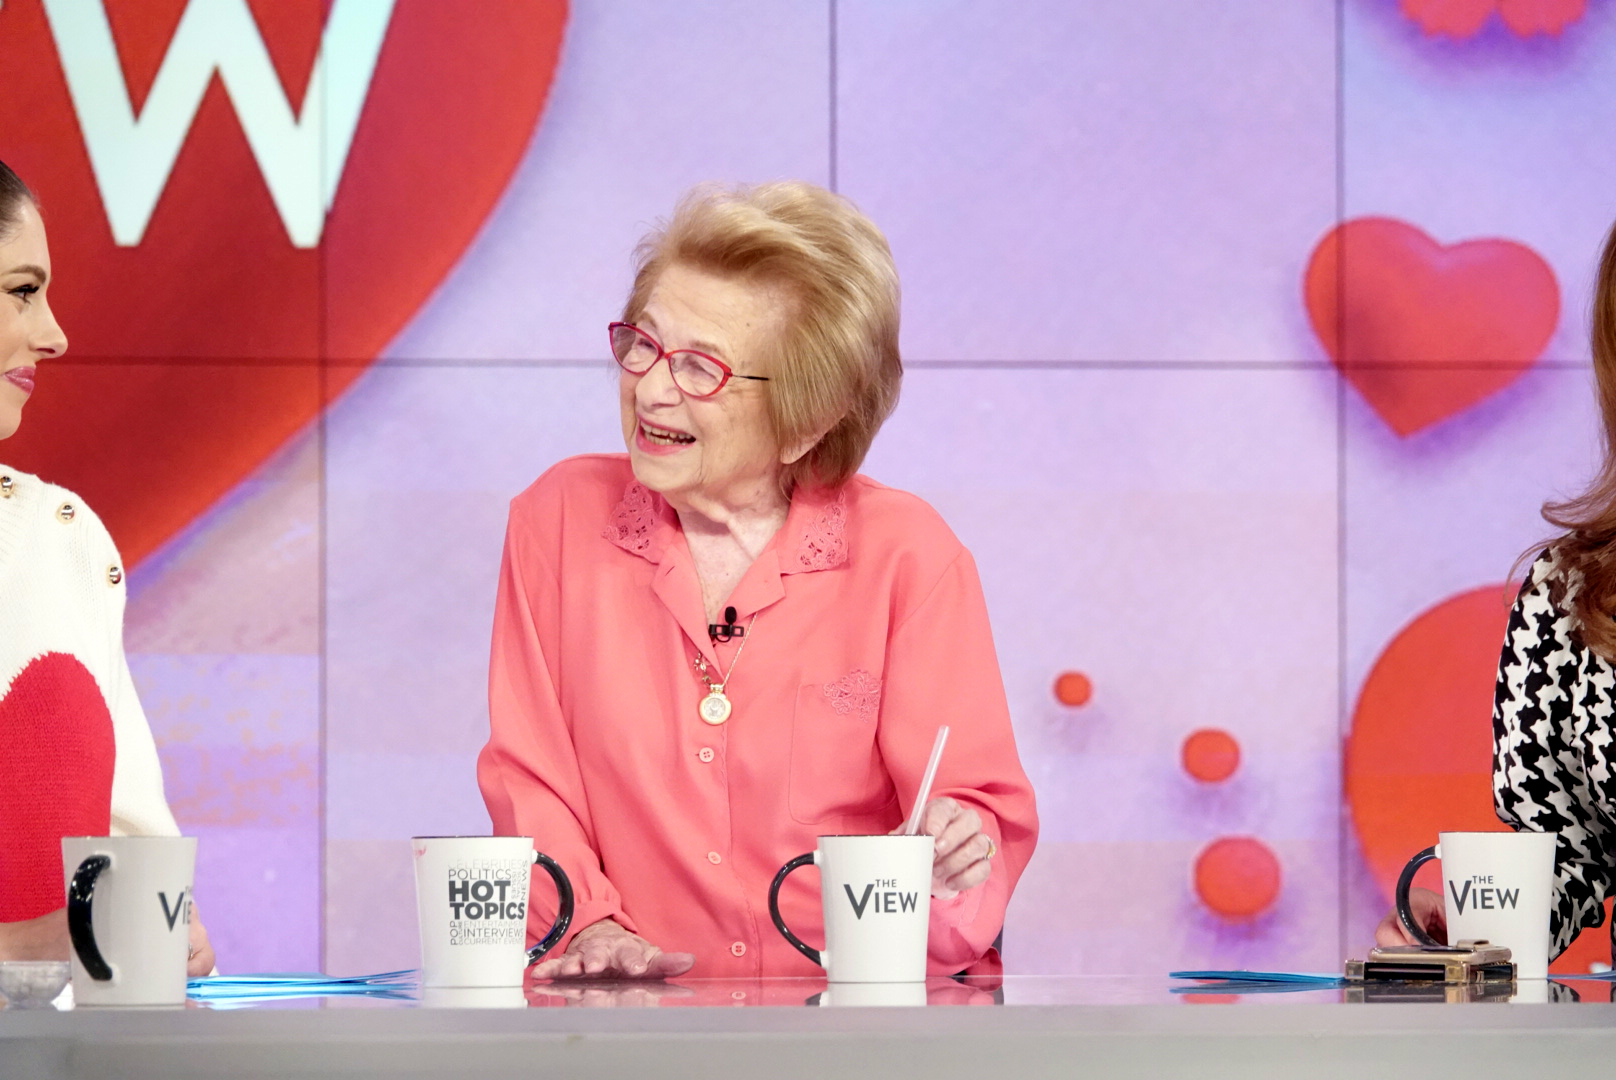 PHOTO: Dr. Ruth shares her concern for millennials' loneliness with "The View" co-hosts on Feb. 14, 2019.